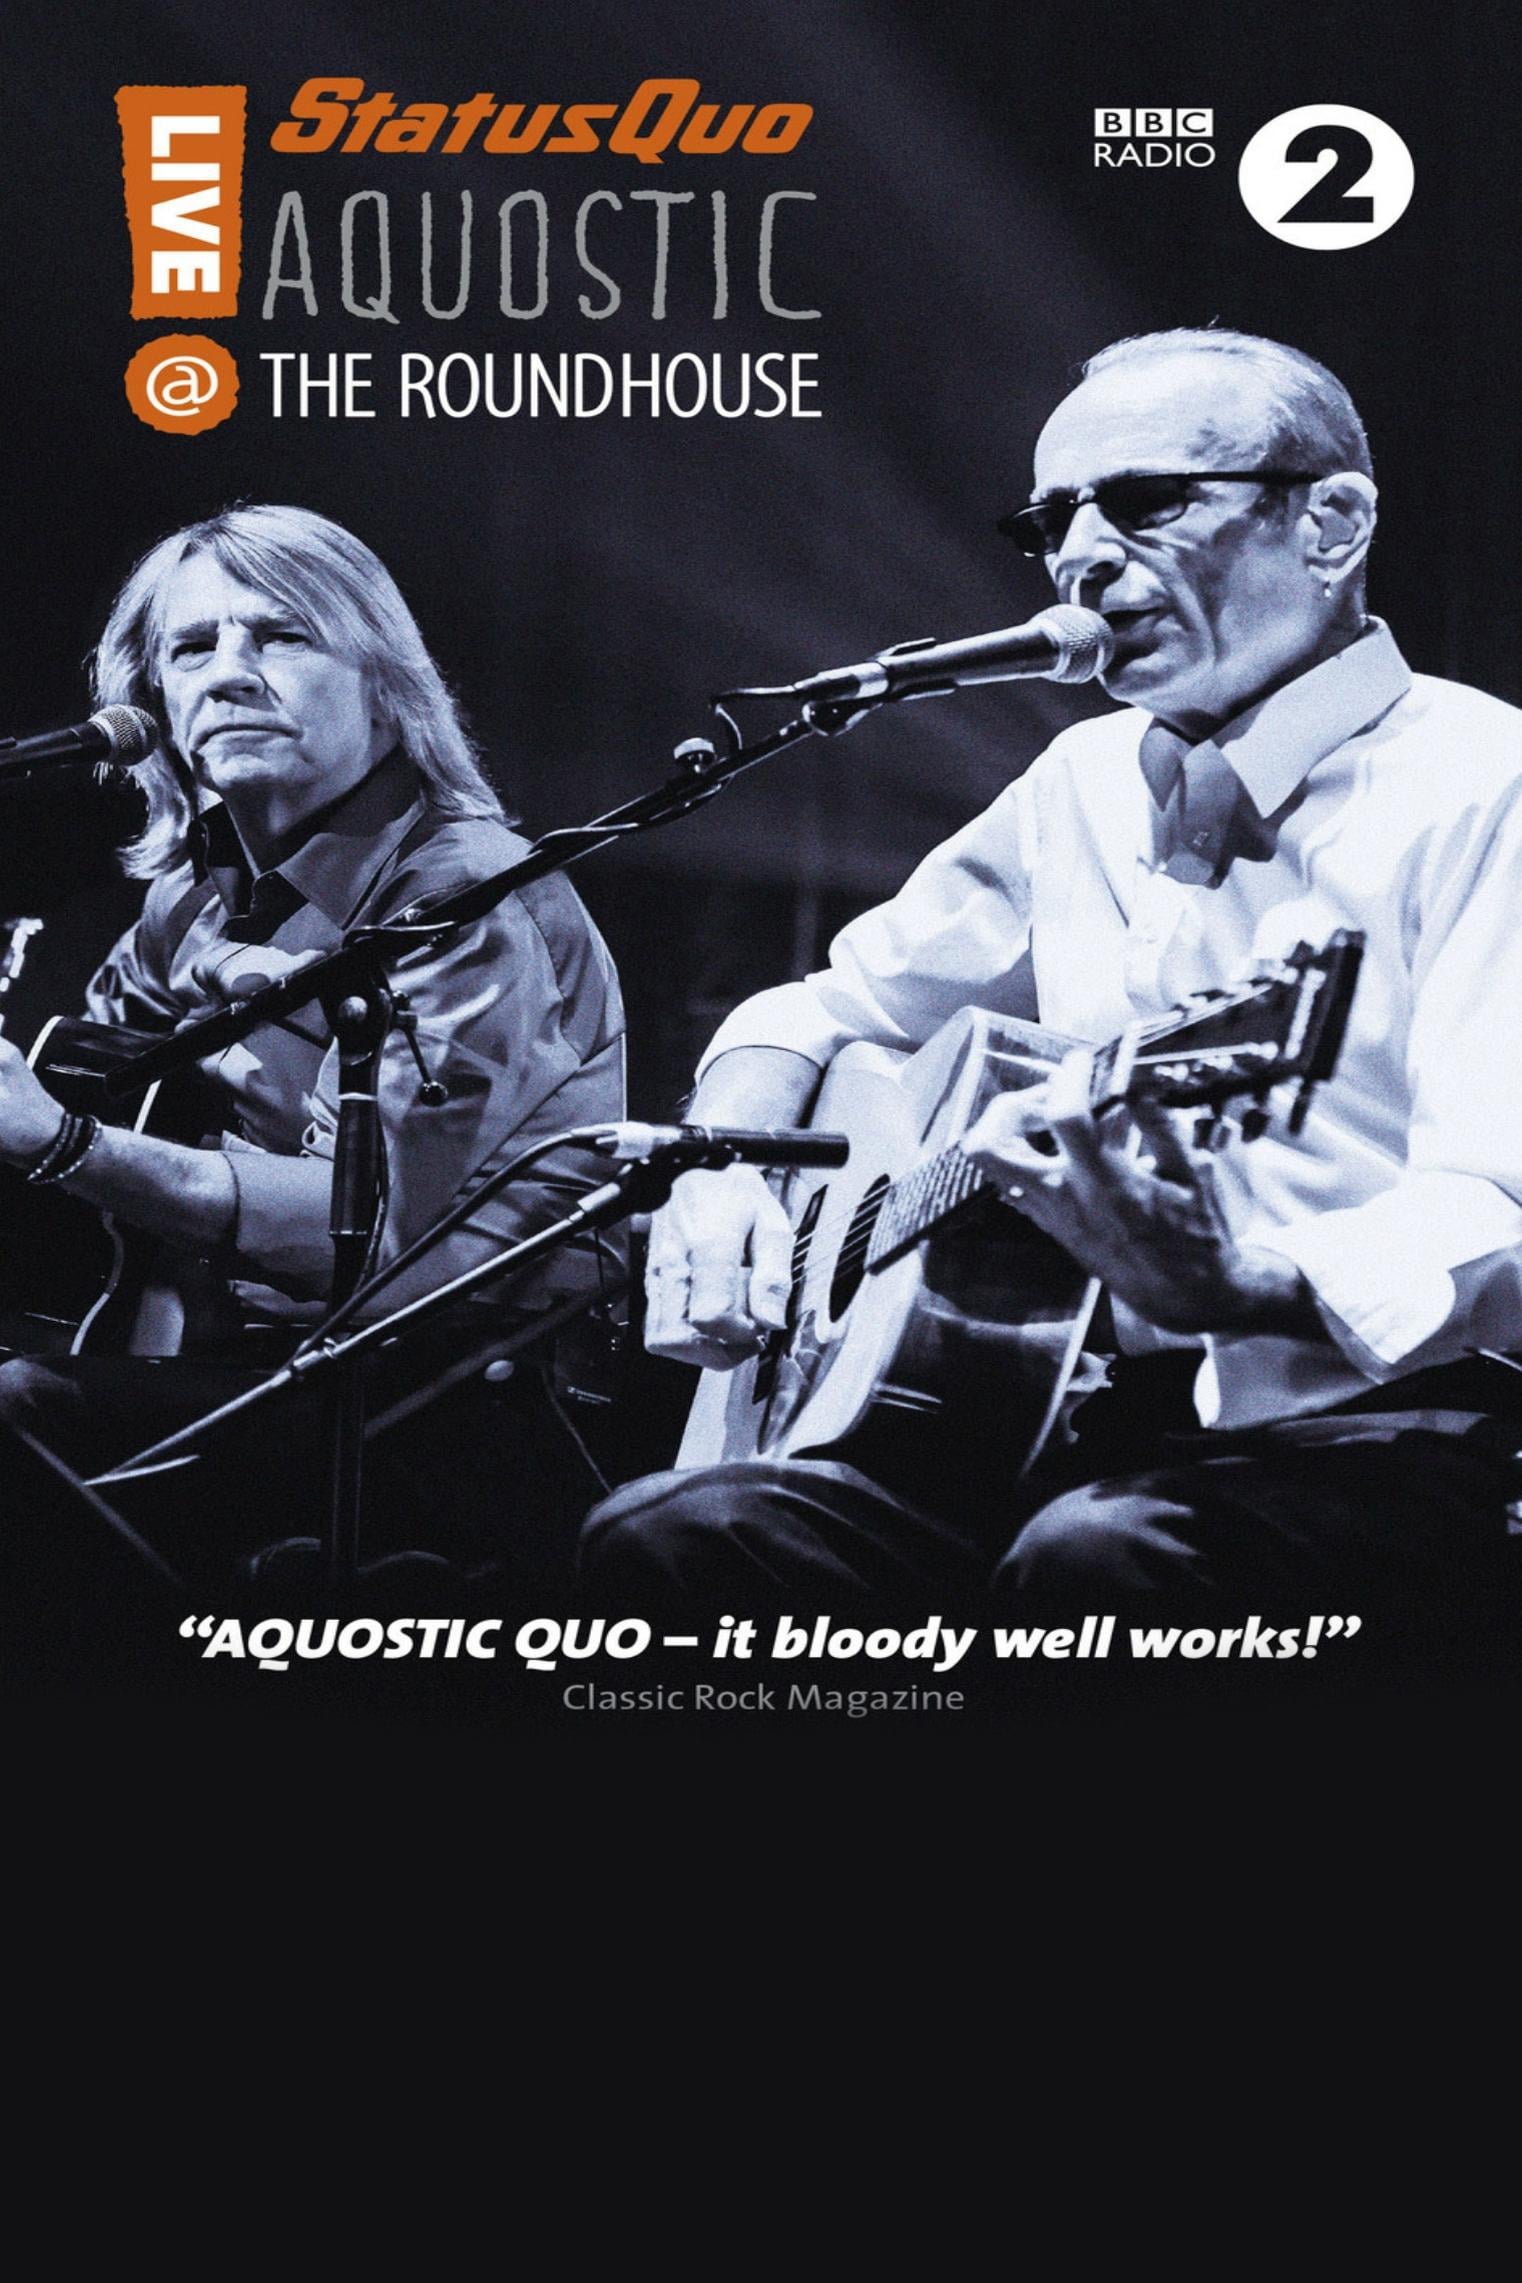 Status Quo - Aquostic - Live at the Roundhouse